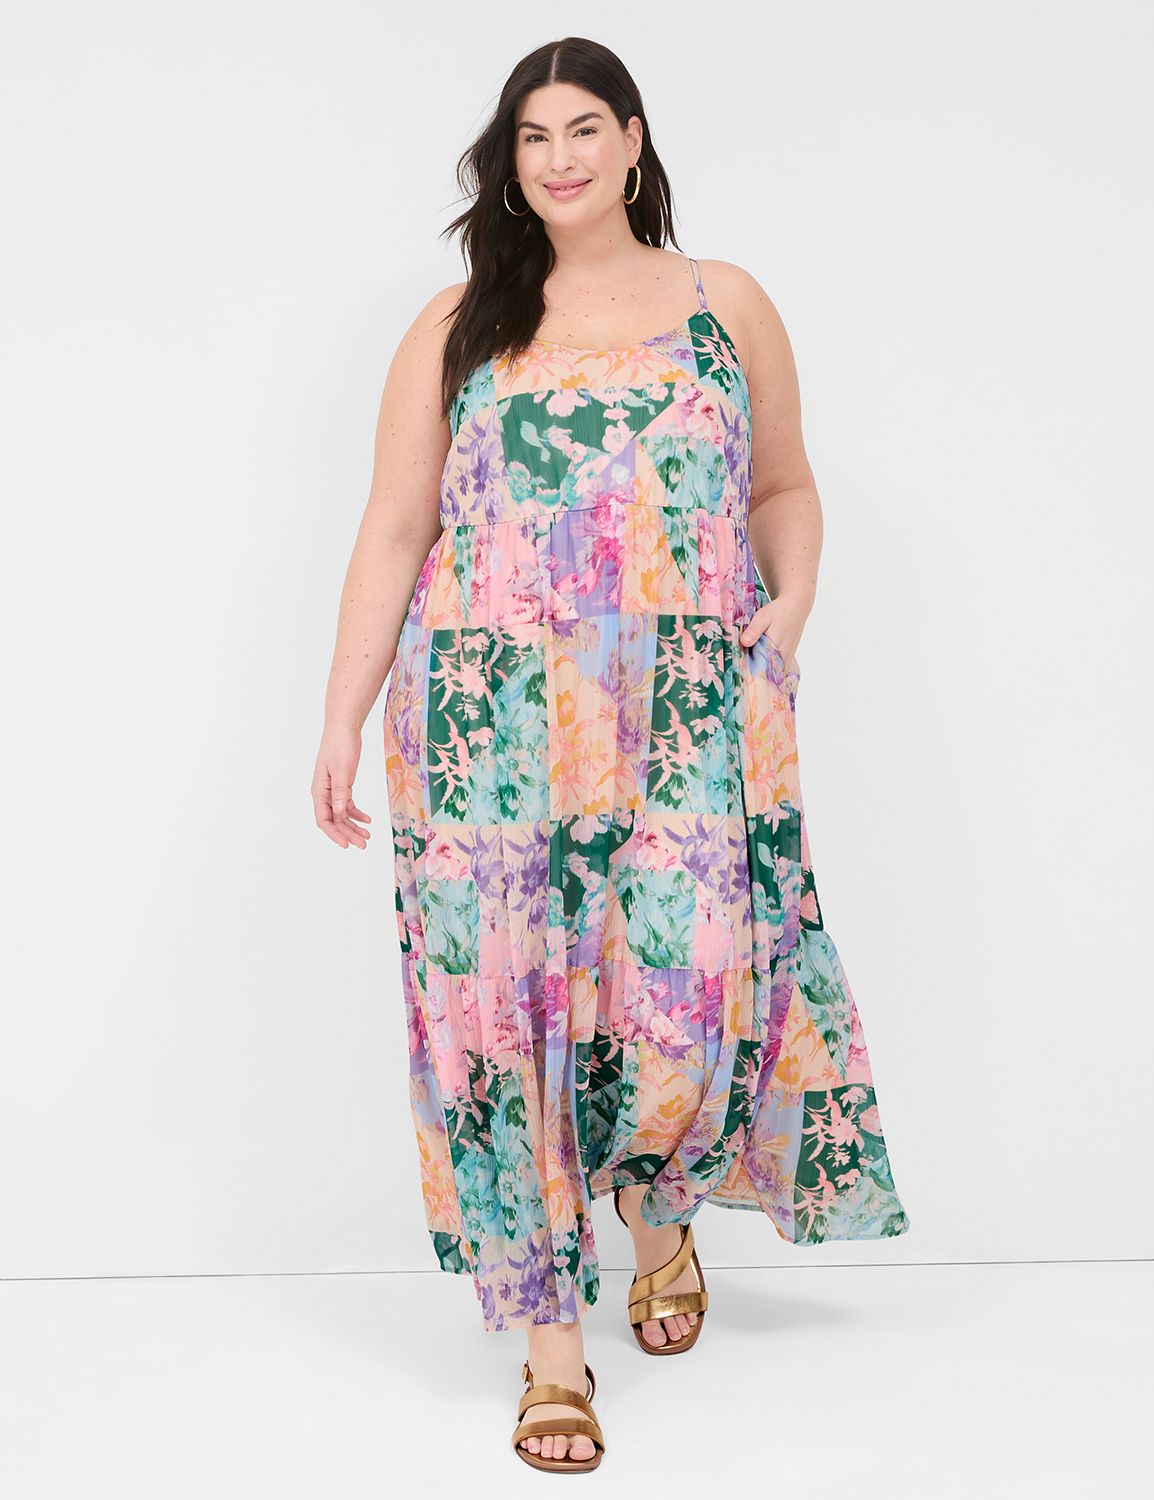 Shop New Arrivals In Plus Size Clothing